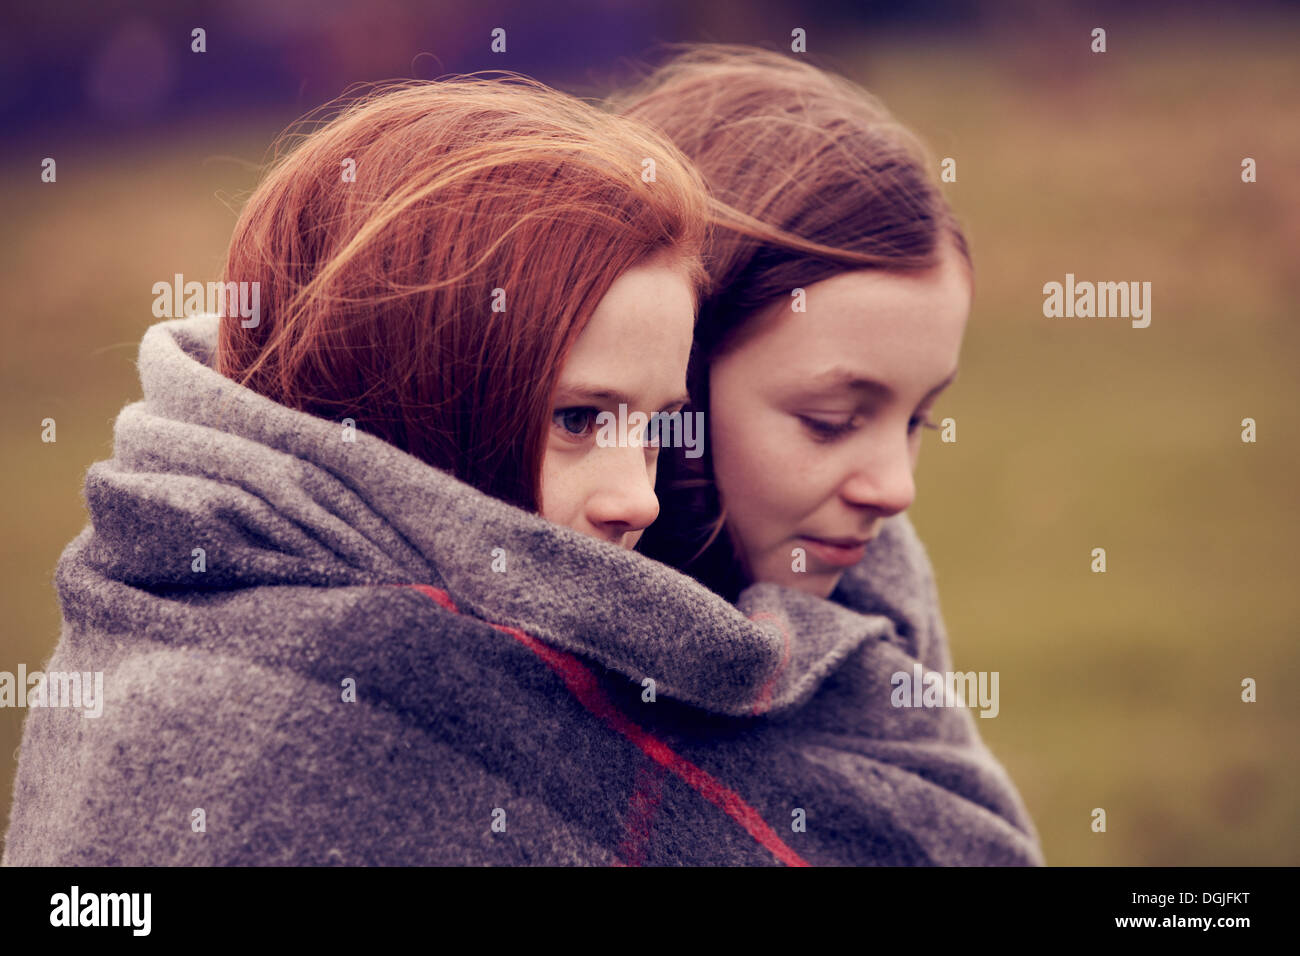 Girls wrapped in a blanket outdoors Stock Photo